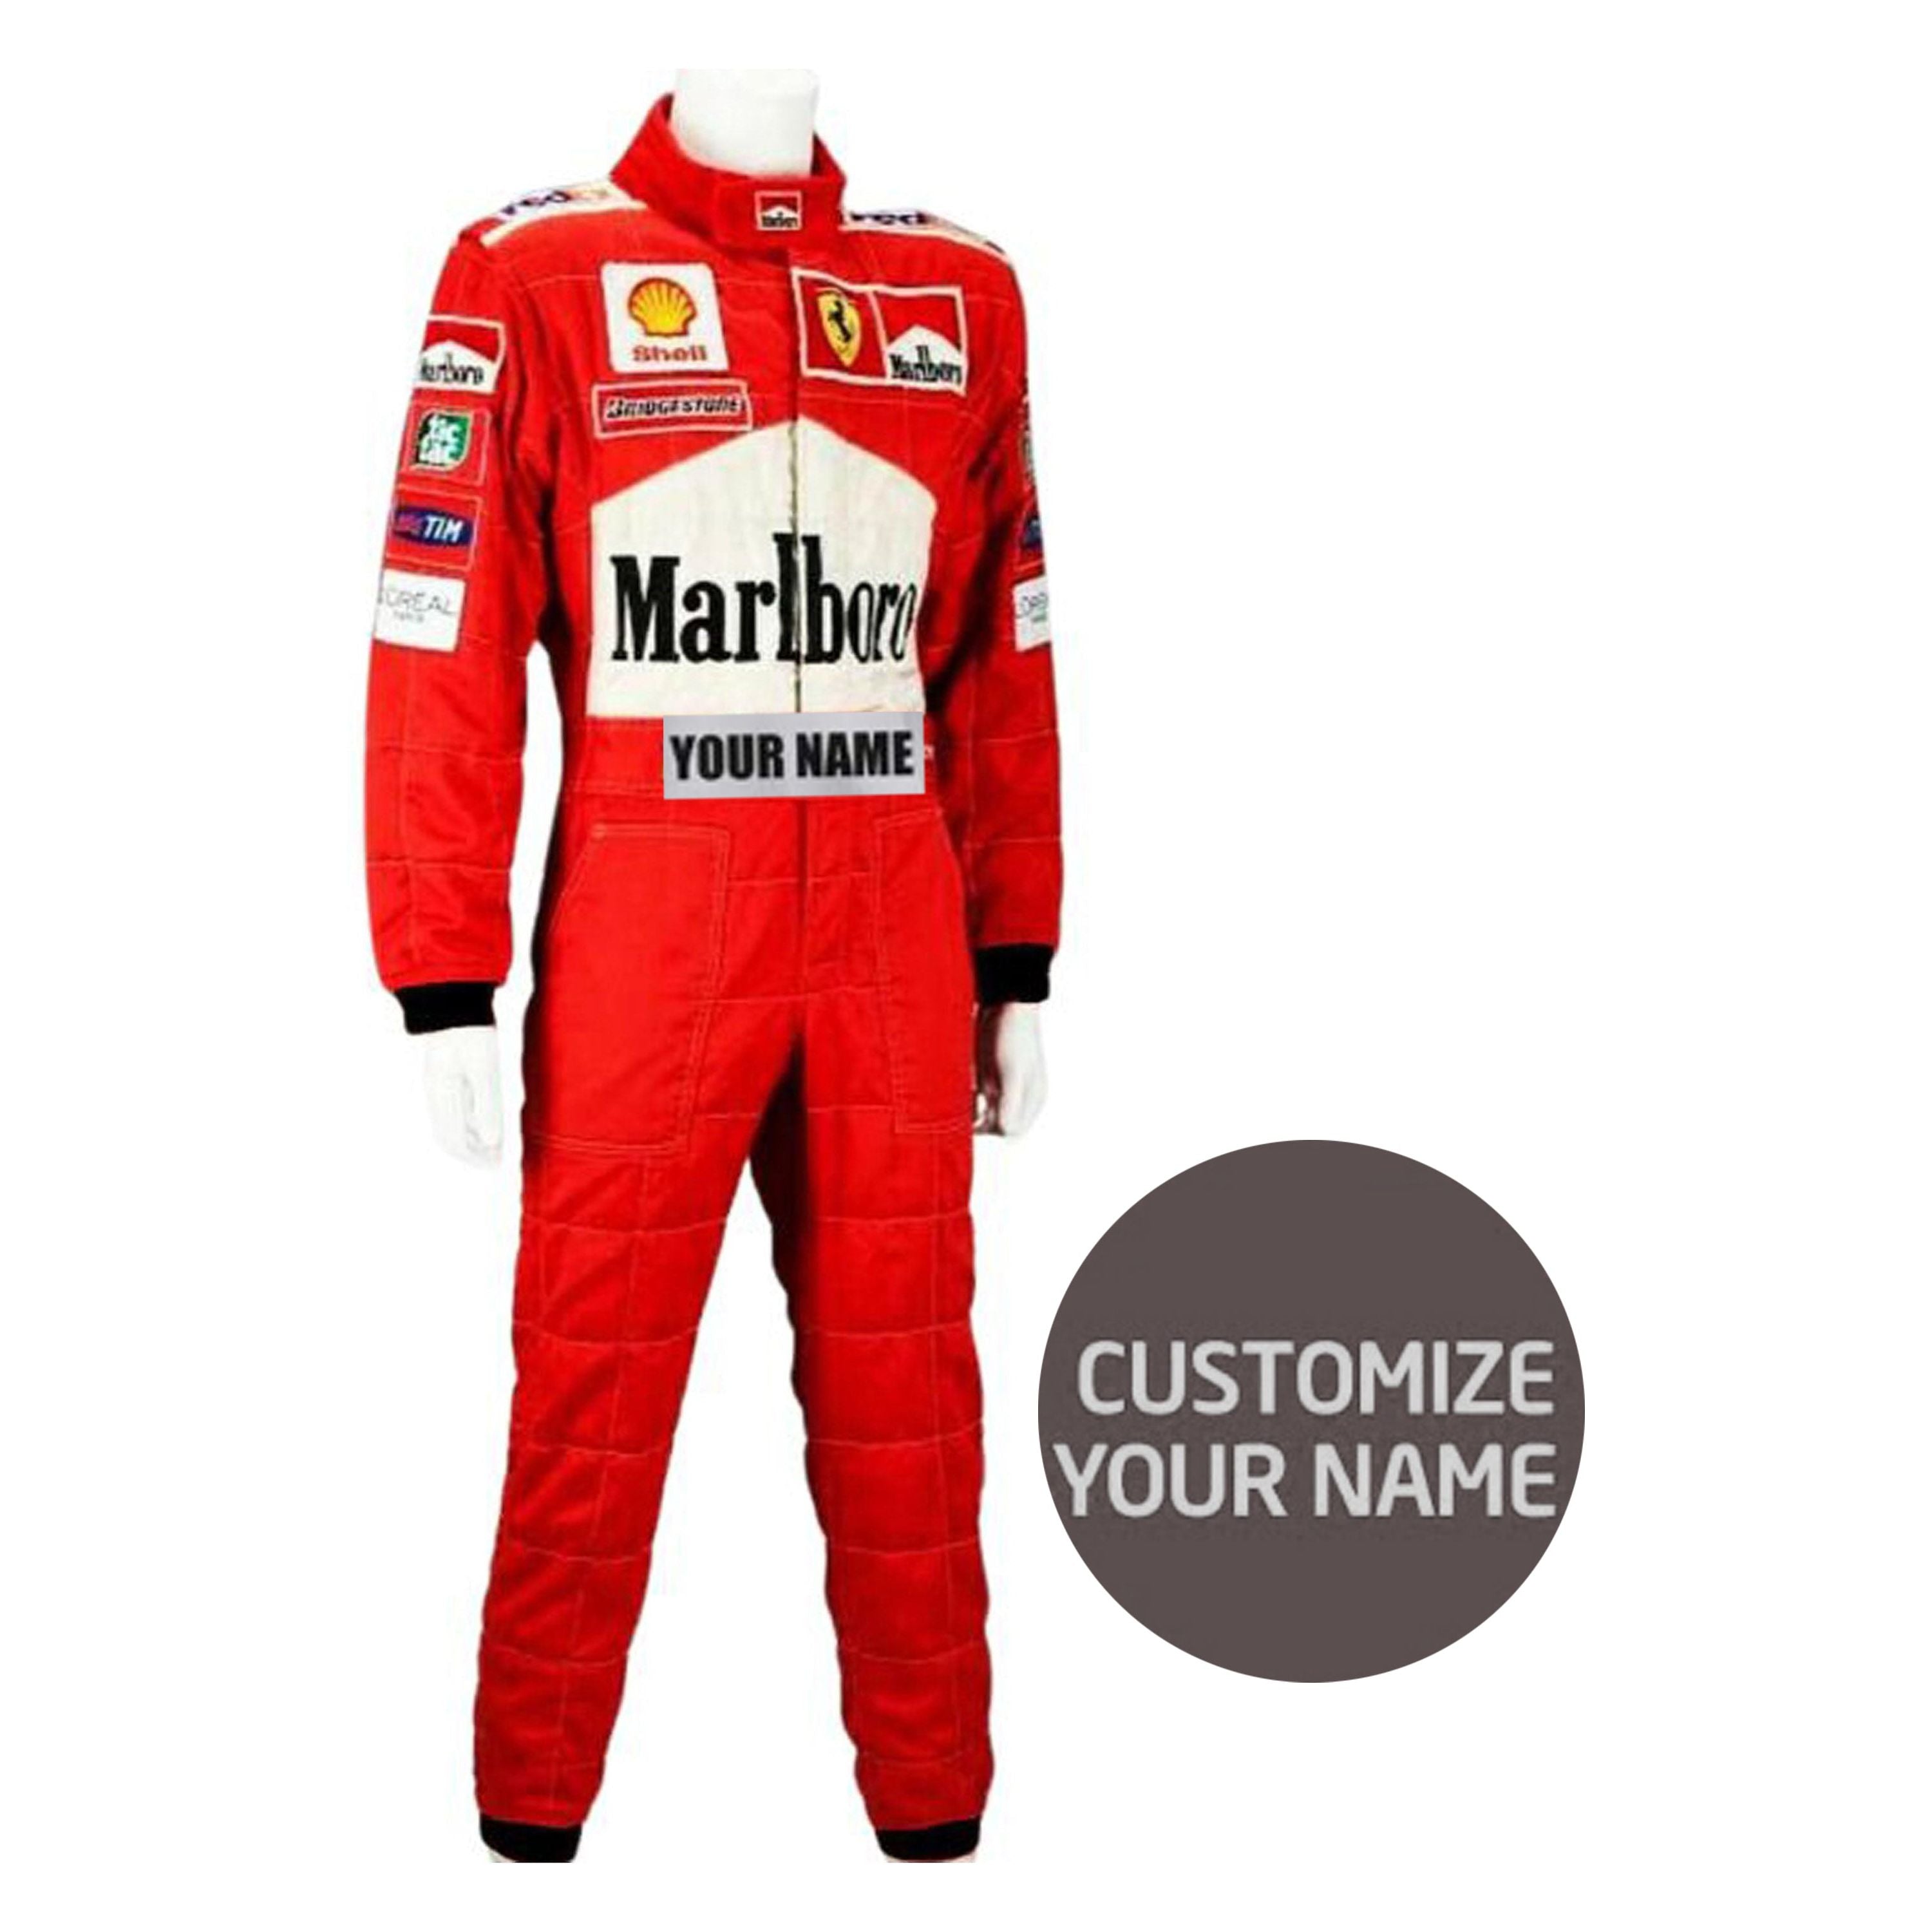 Go kart racing Sublimation Protective clothing Racing gear Suit  NM-011